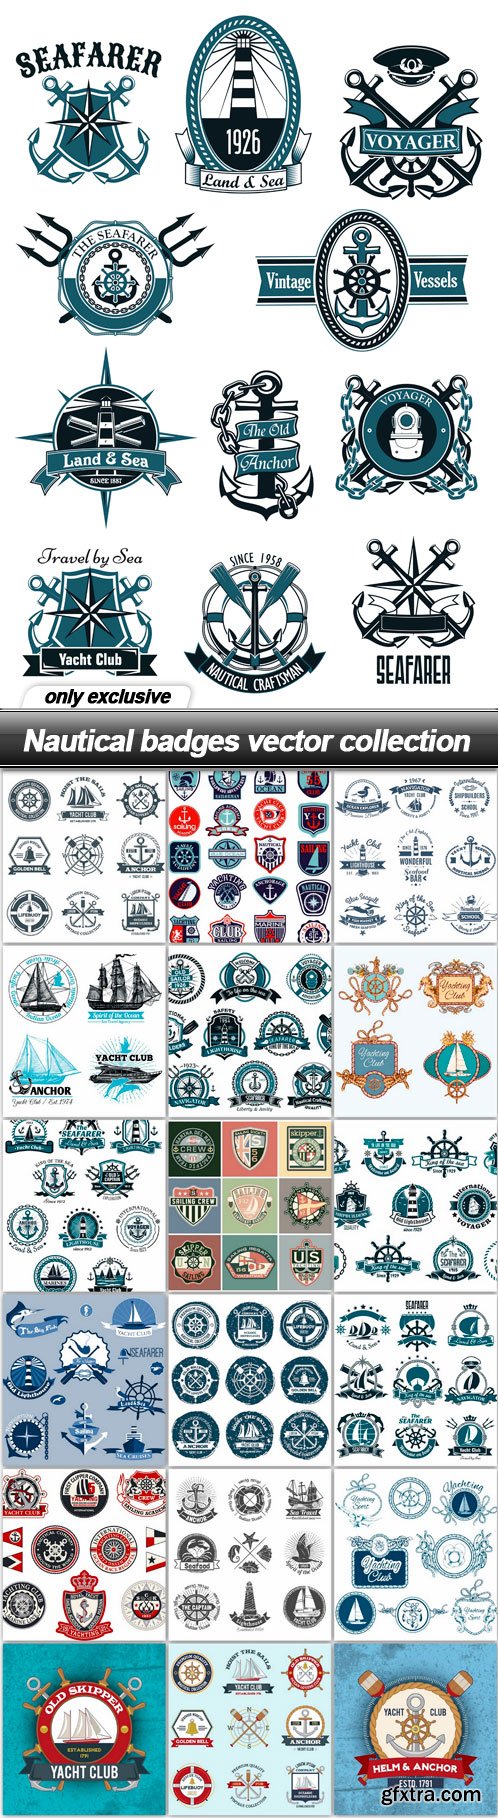 Nautical badges vector collection - 19 EPS